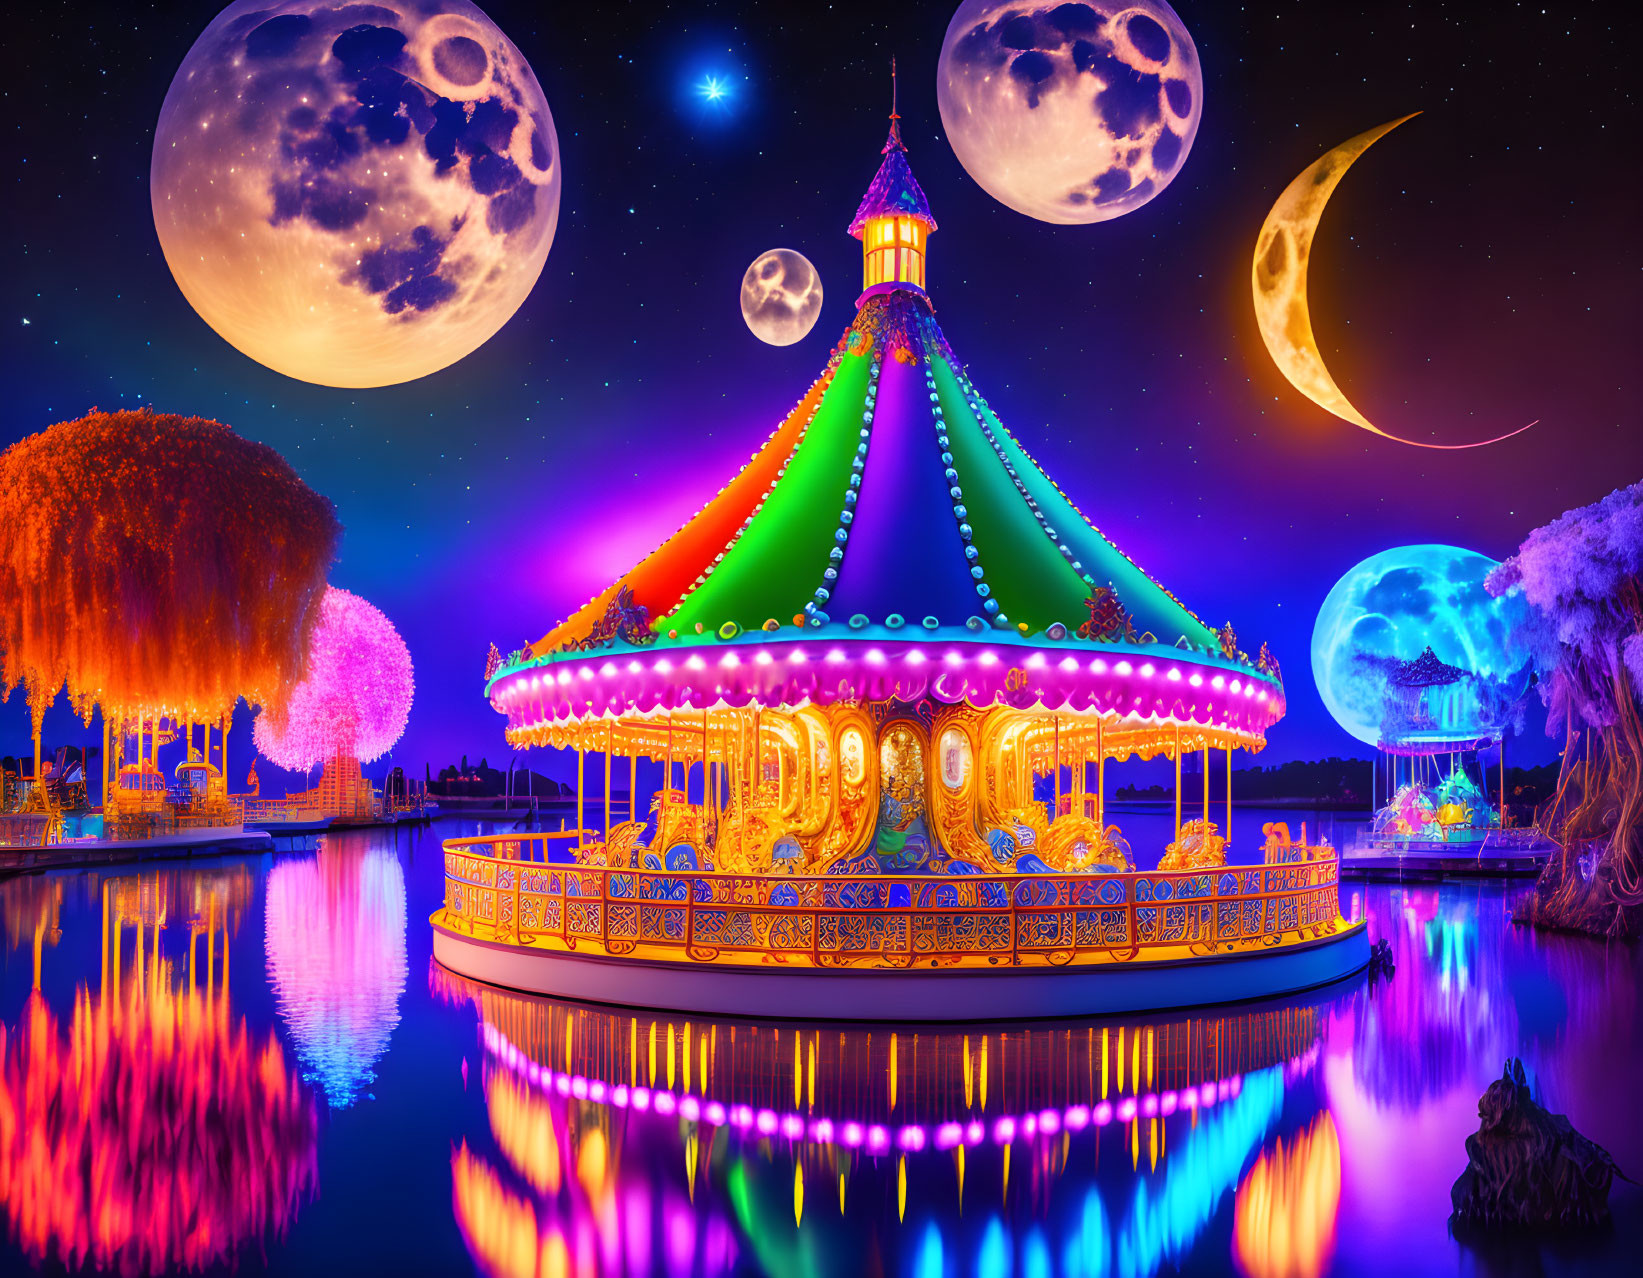 Colorful Carousel by Reflective Lake & Fantastical Night Sky